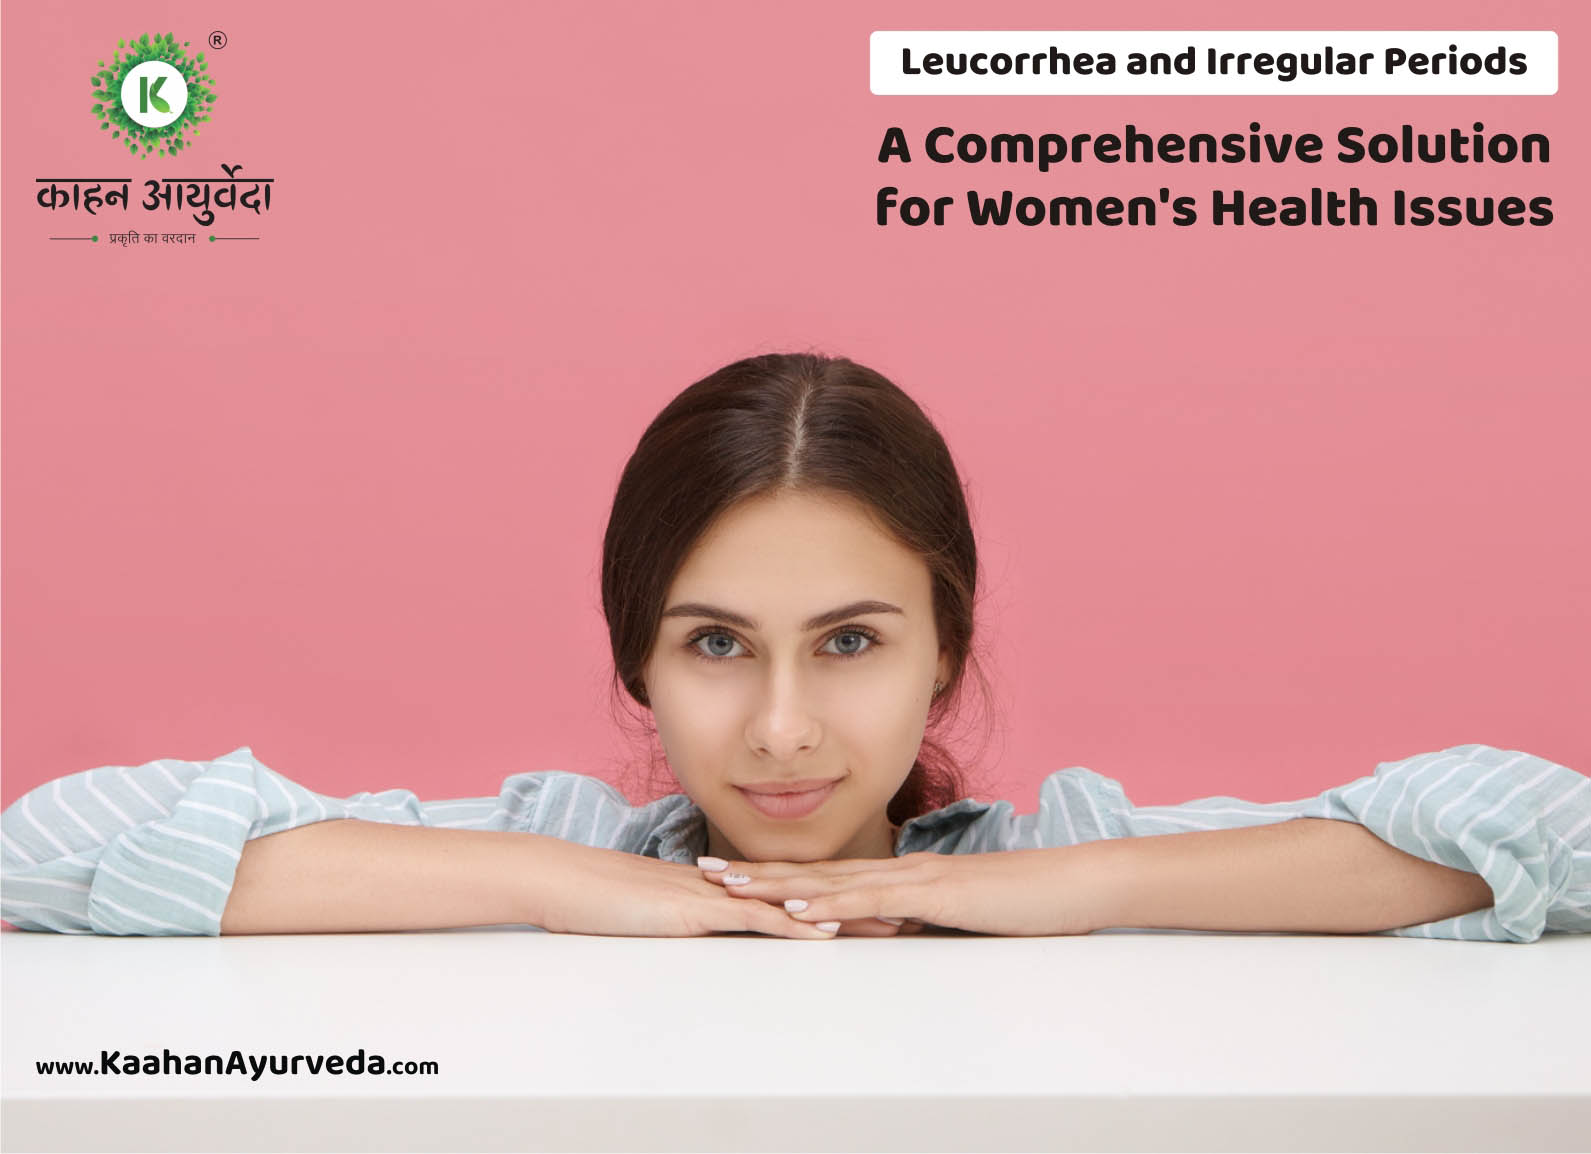 A Comprehensive Solution for Women's Health Issues - Leucorrhea and Irregular Periods